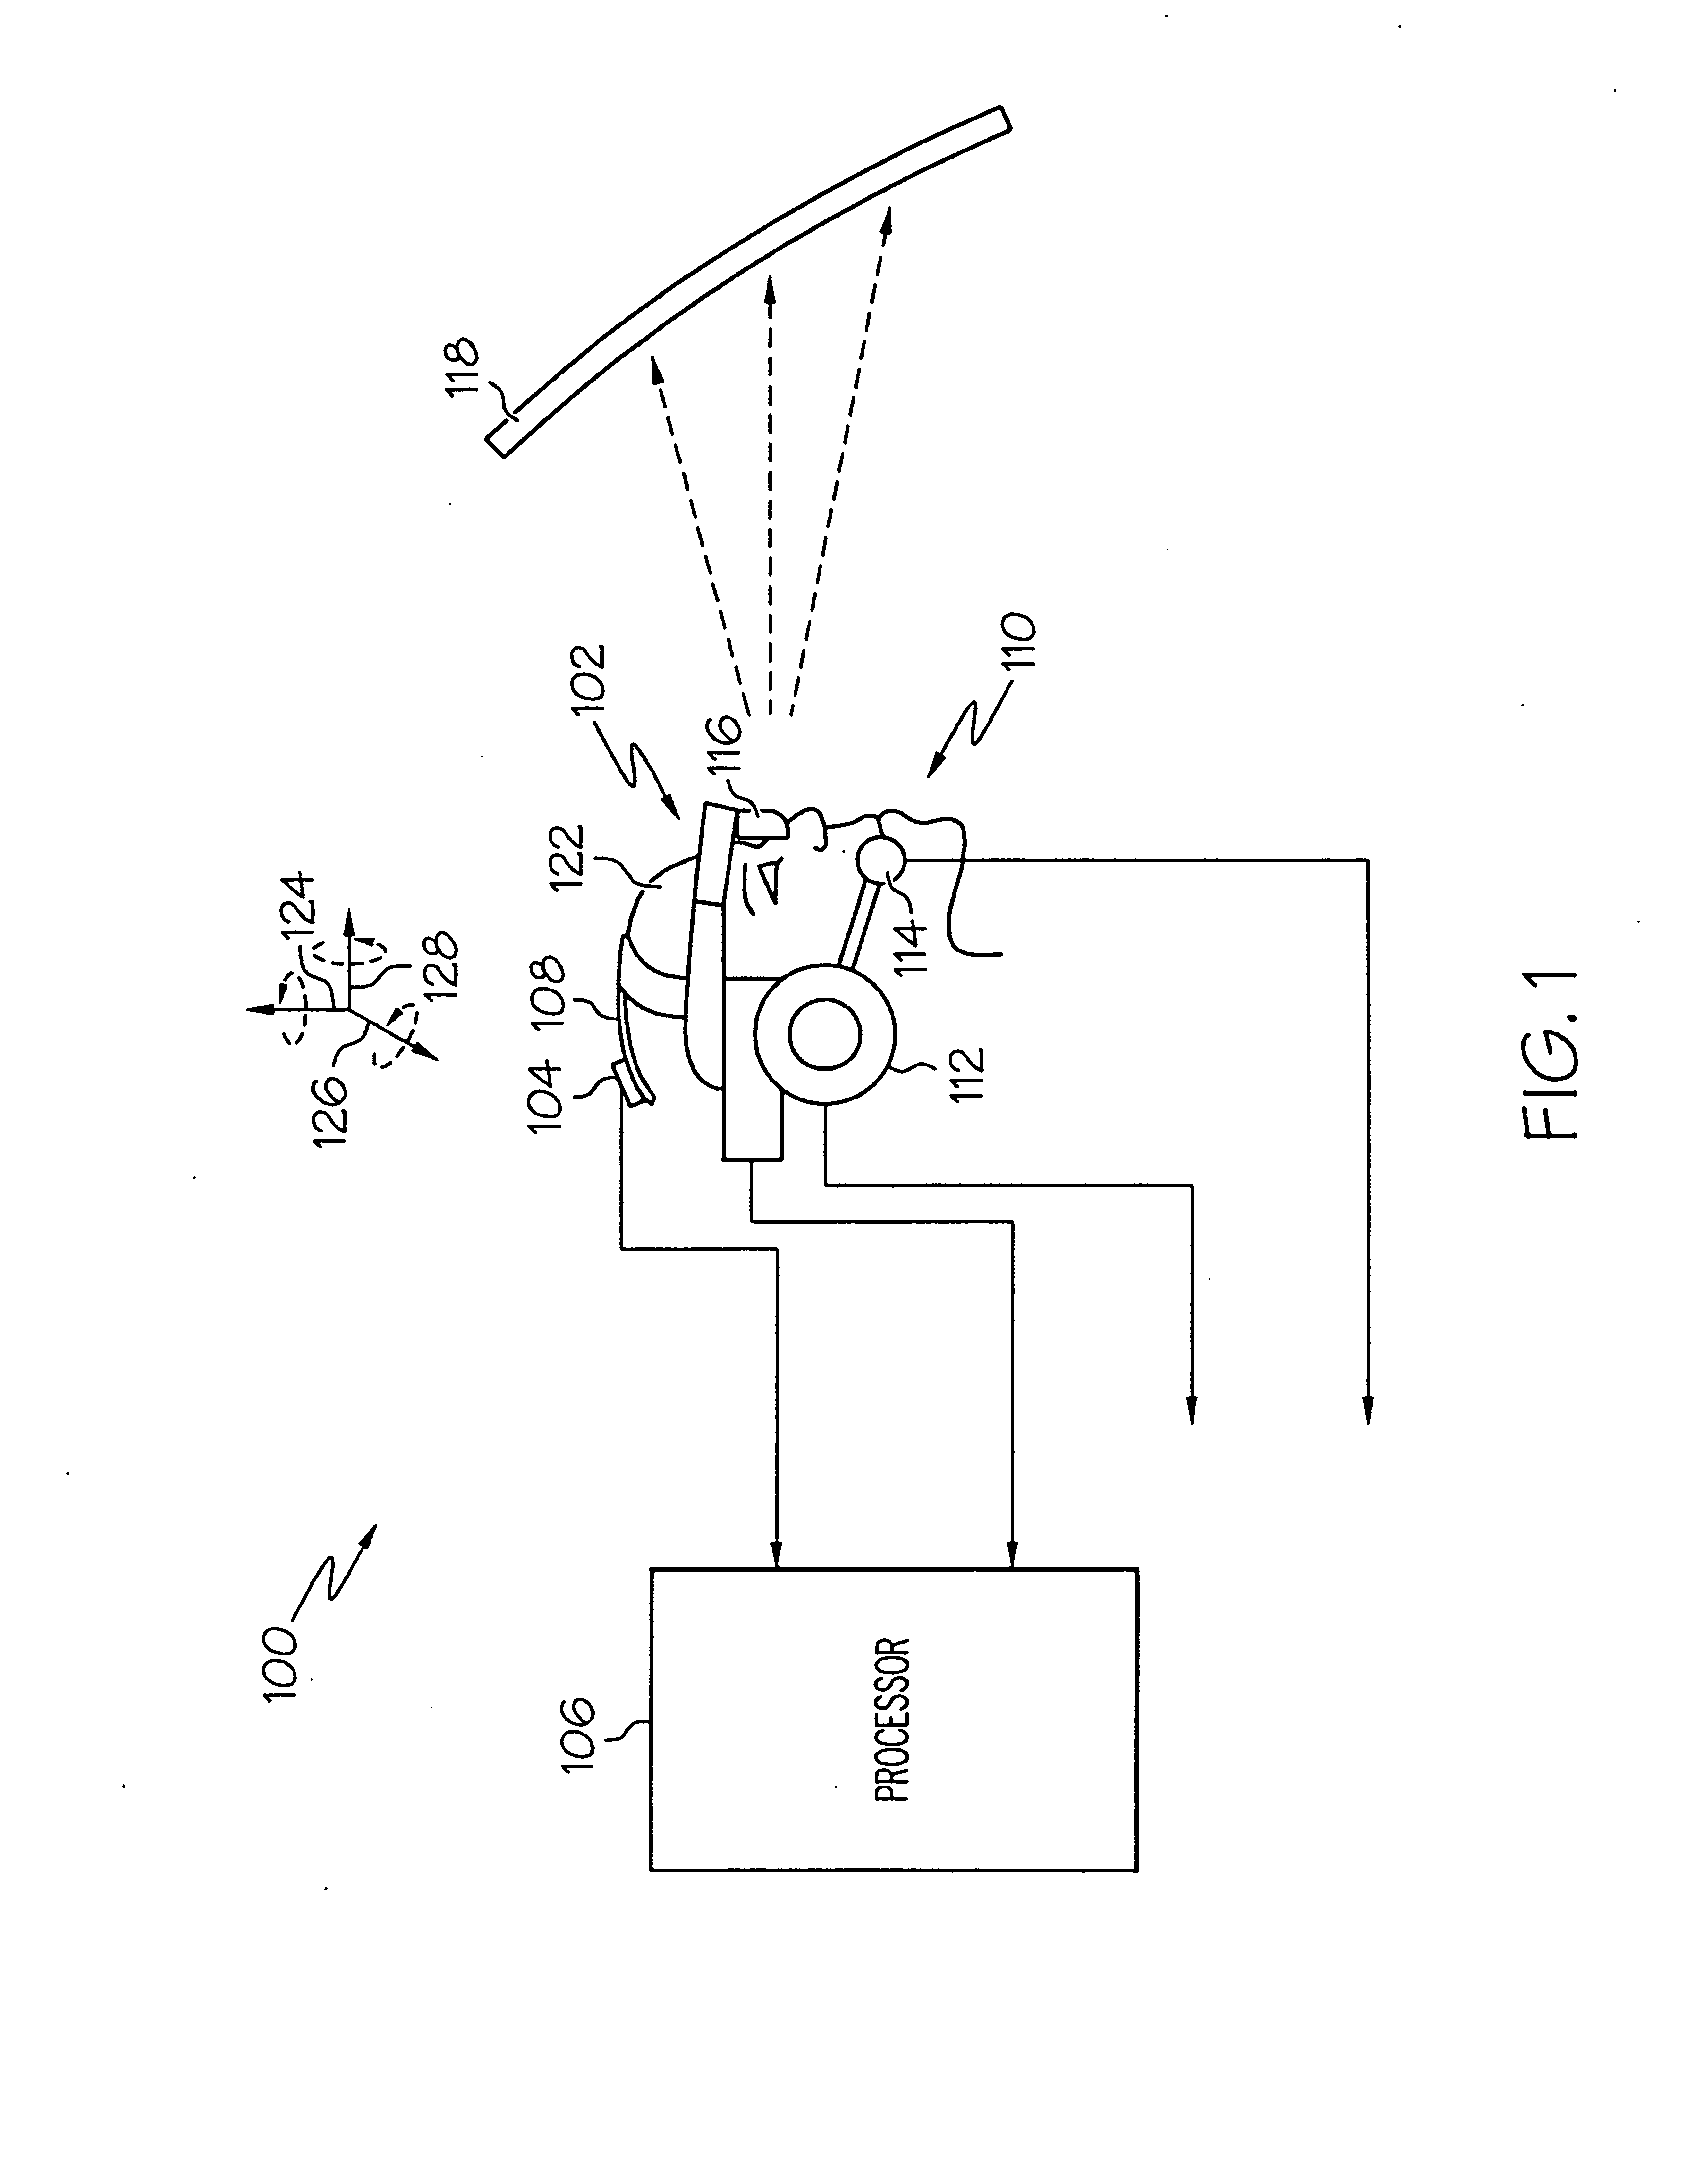 Near-to-eye display artifact reduction system and method